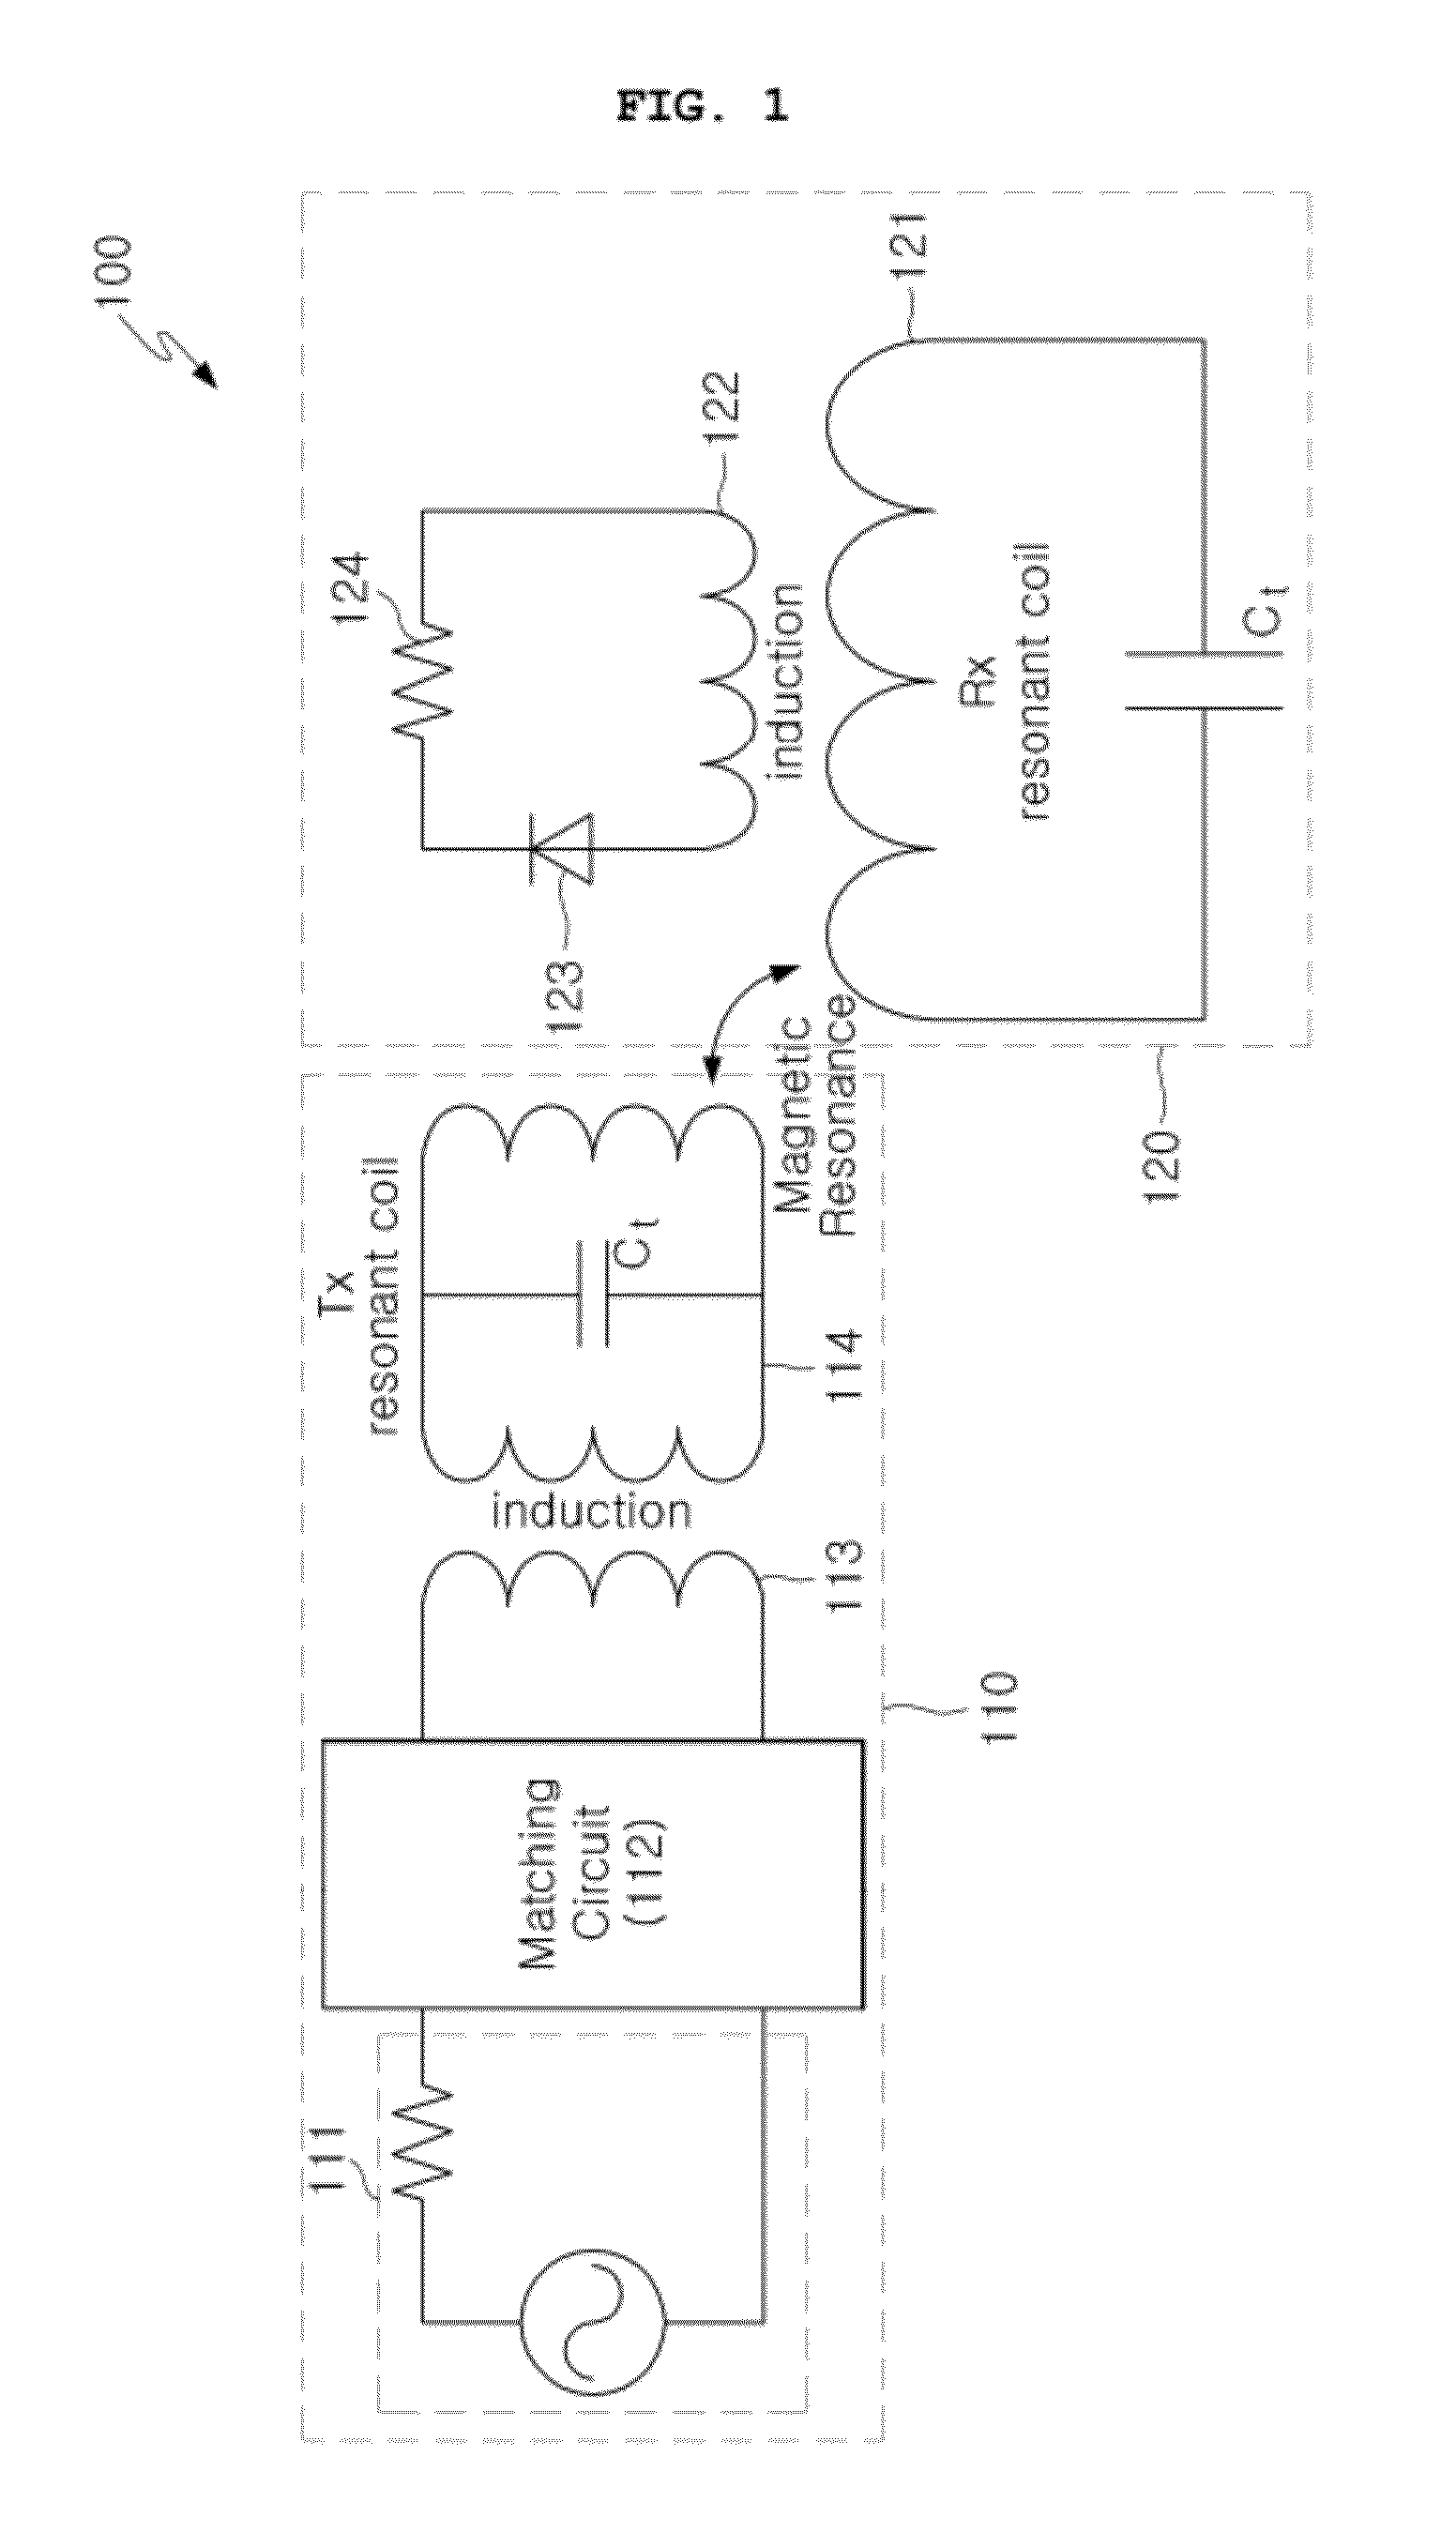 Space-adaptive wireless power transfer system and method using evanescent field resonance